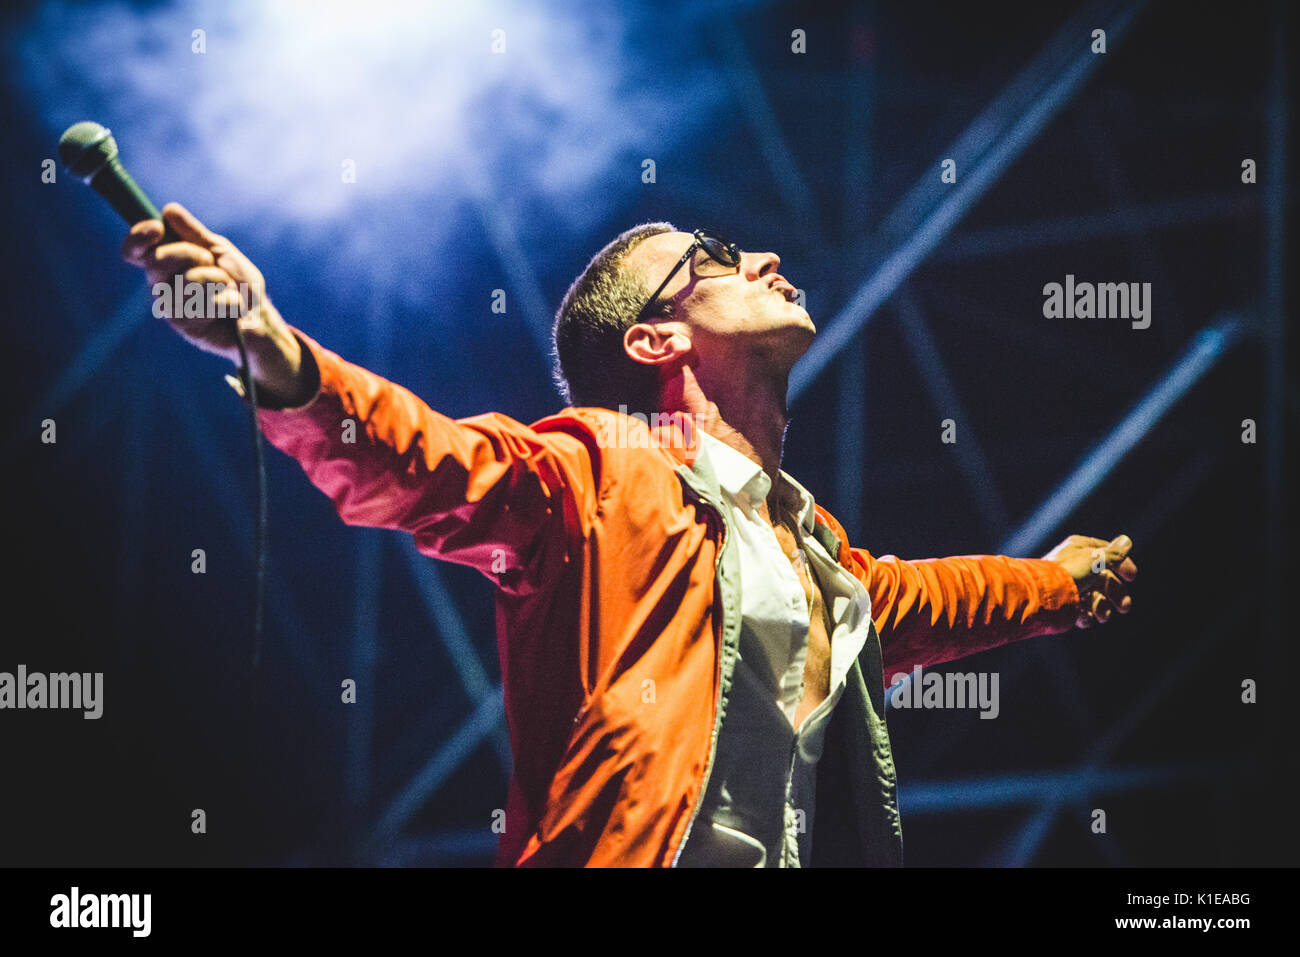 Torino, Italy. 26th Aug, 2017: Richard Ashcroft performing live on stage at the TODays Festival in Torino Credit: Alessandro Bosio/Alamy Live News Stock Photo